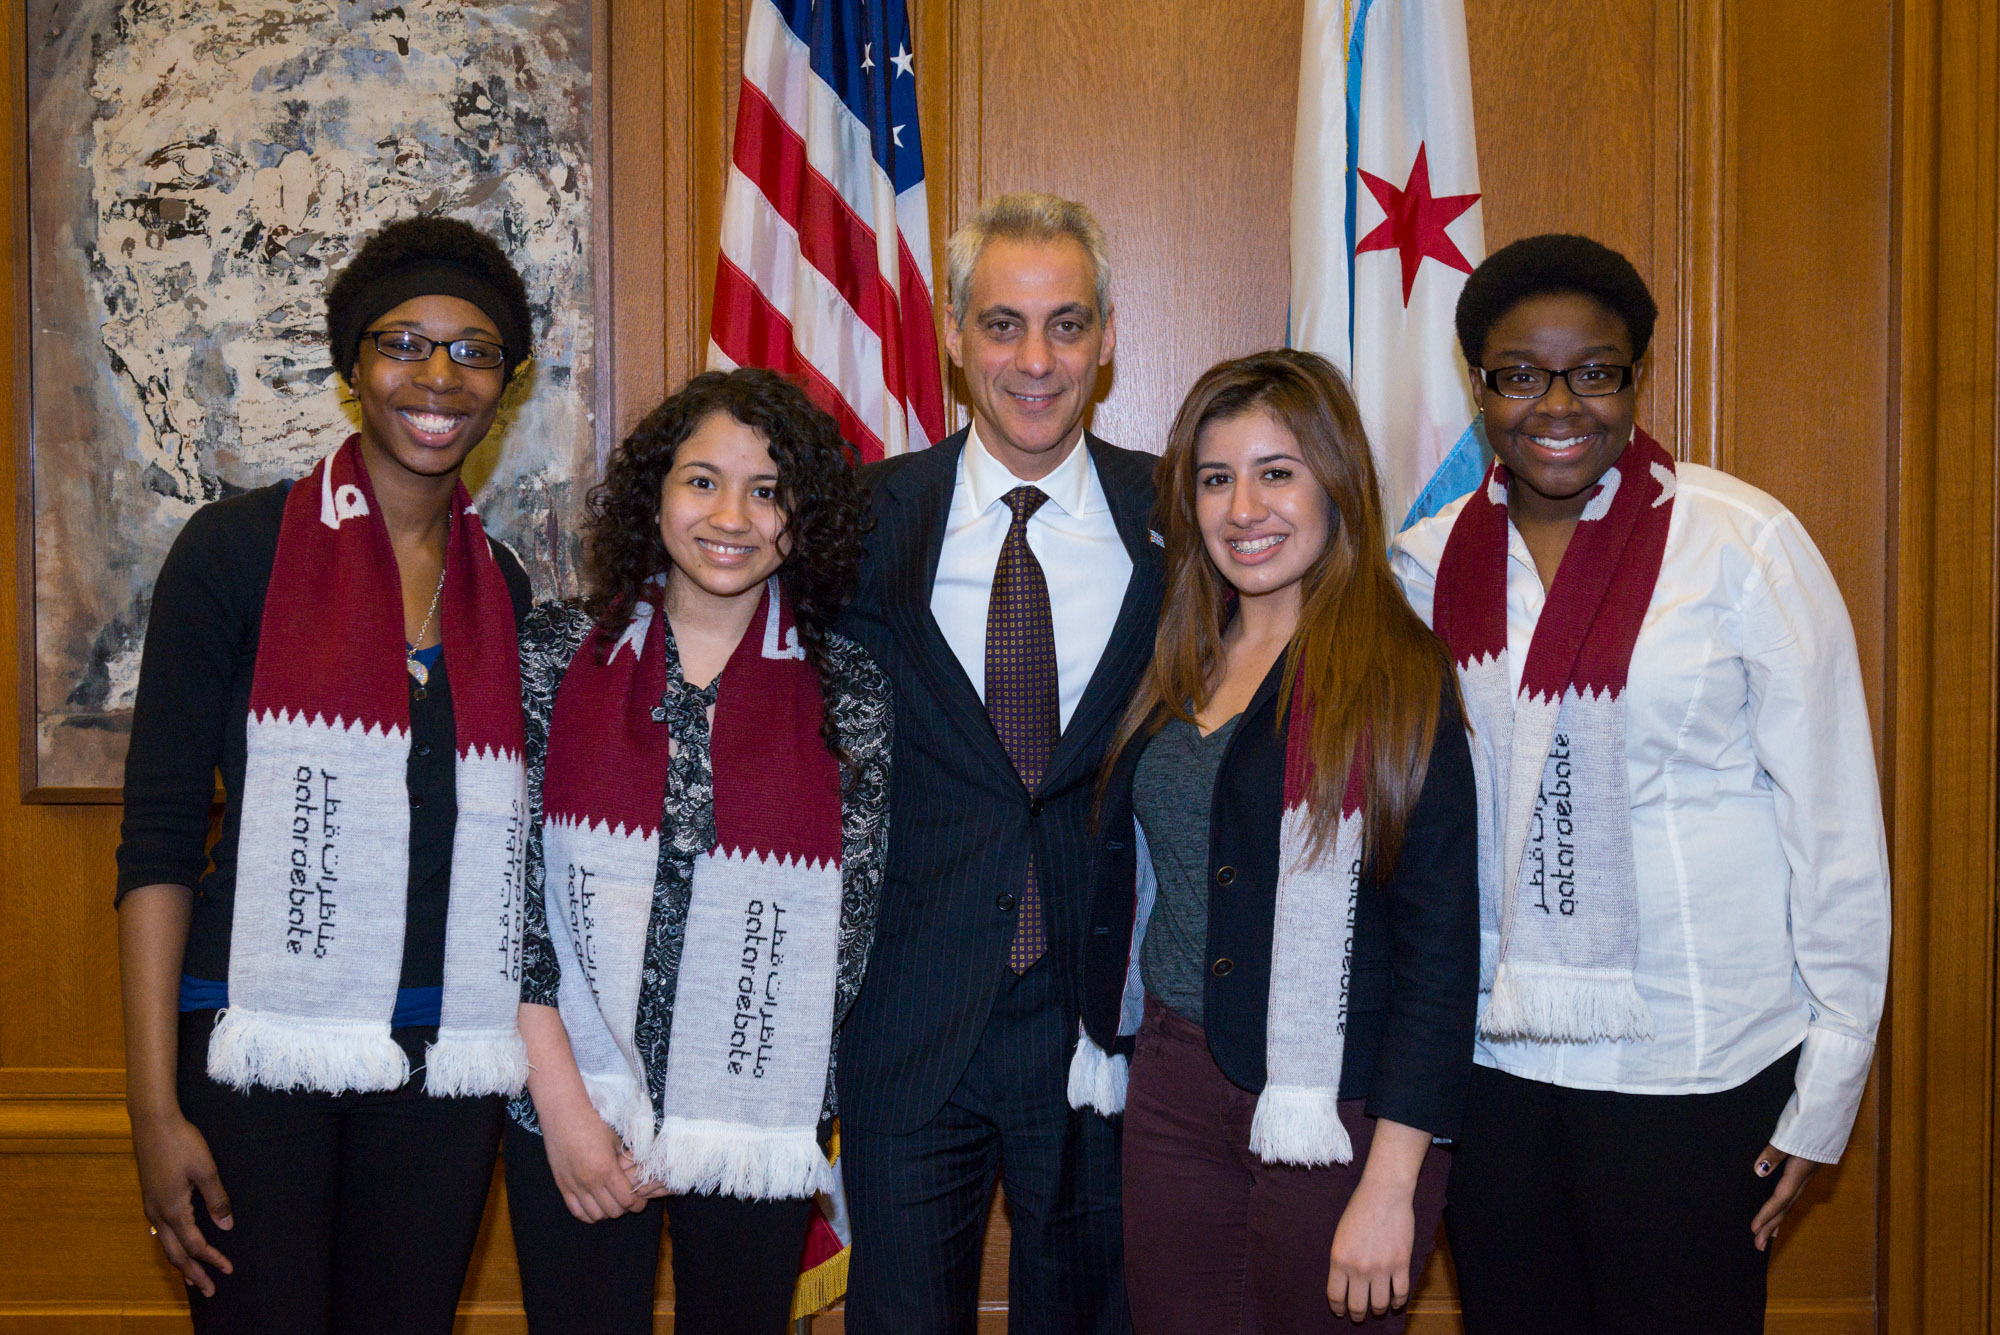 Mayor Emanuel meets and congratulates students from Lindblom Math and Science Academy on their recent participation in the Qatar Debate World Championship